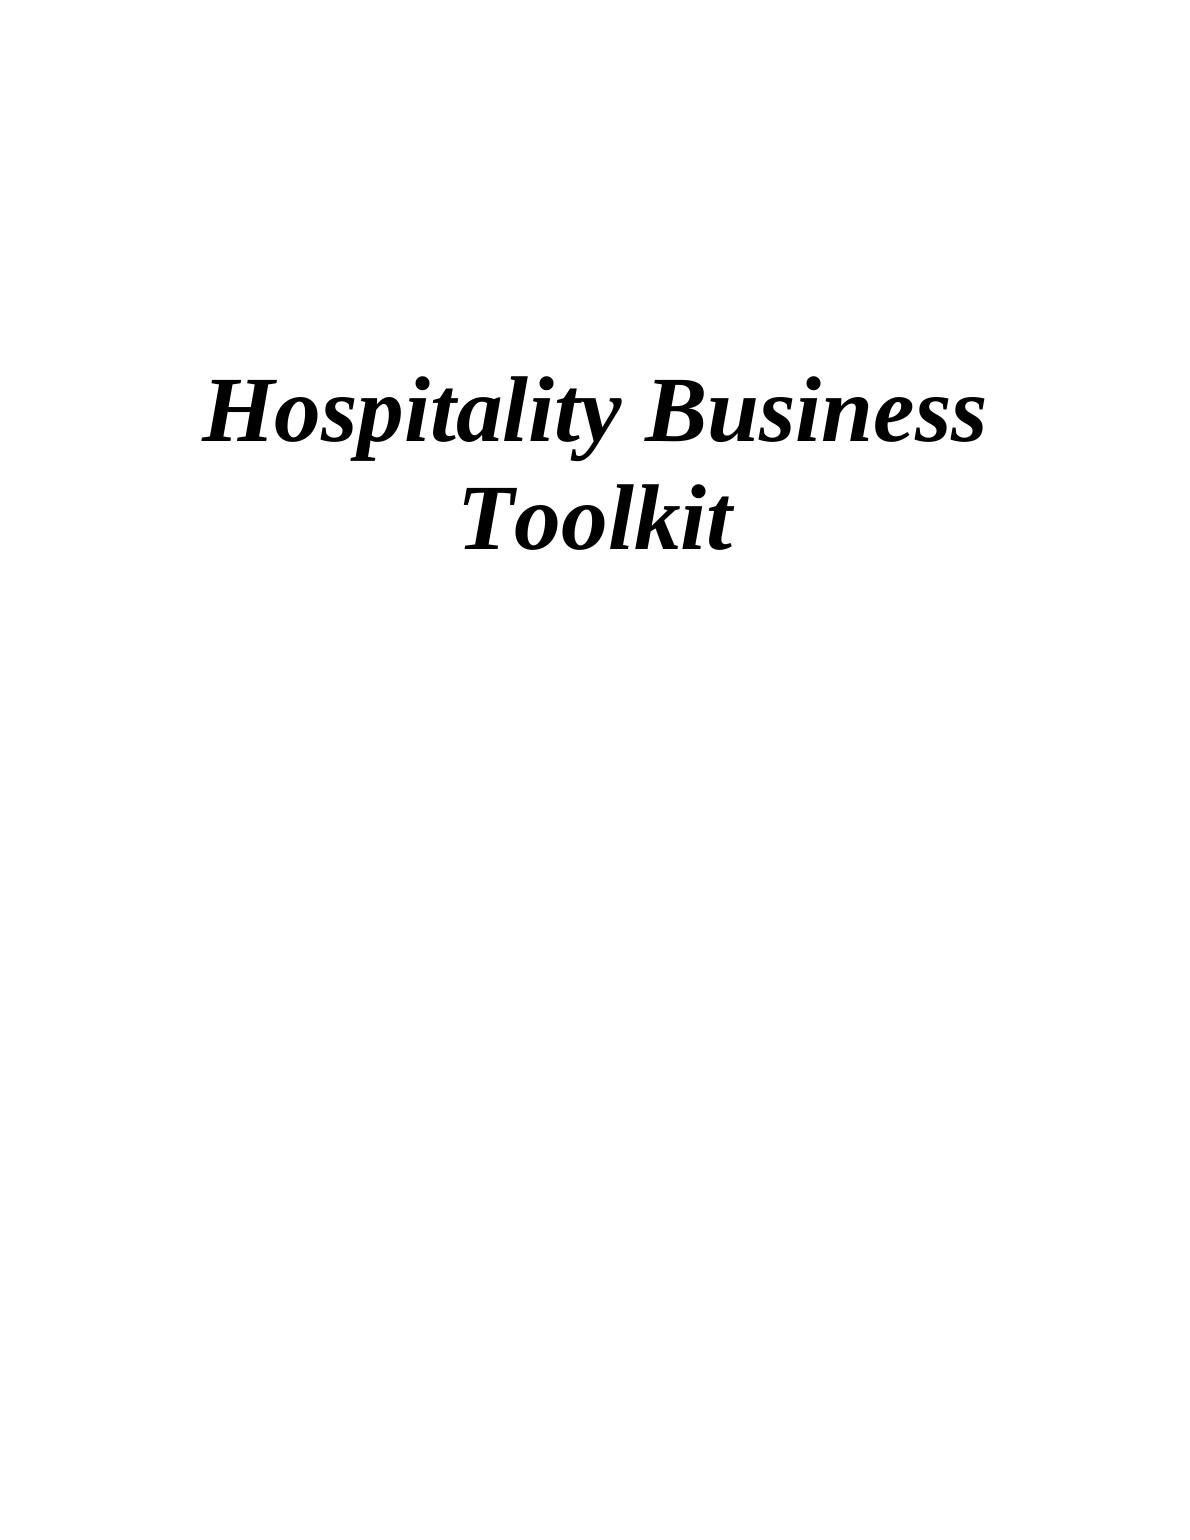 HR Life Cycle in Hospitality Business Toolkit_1